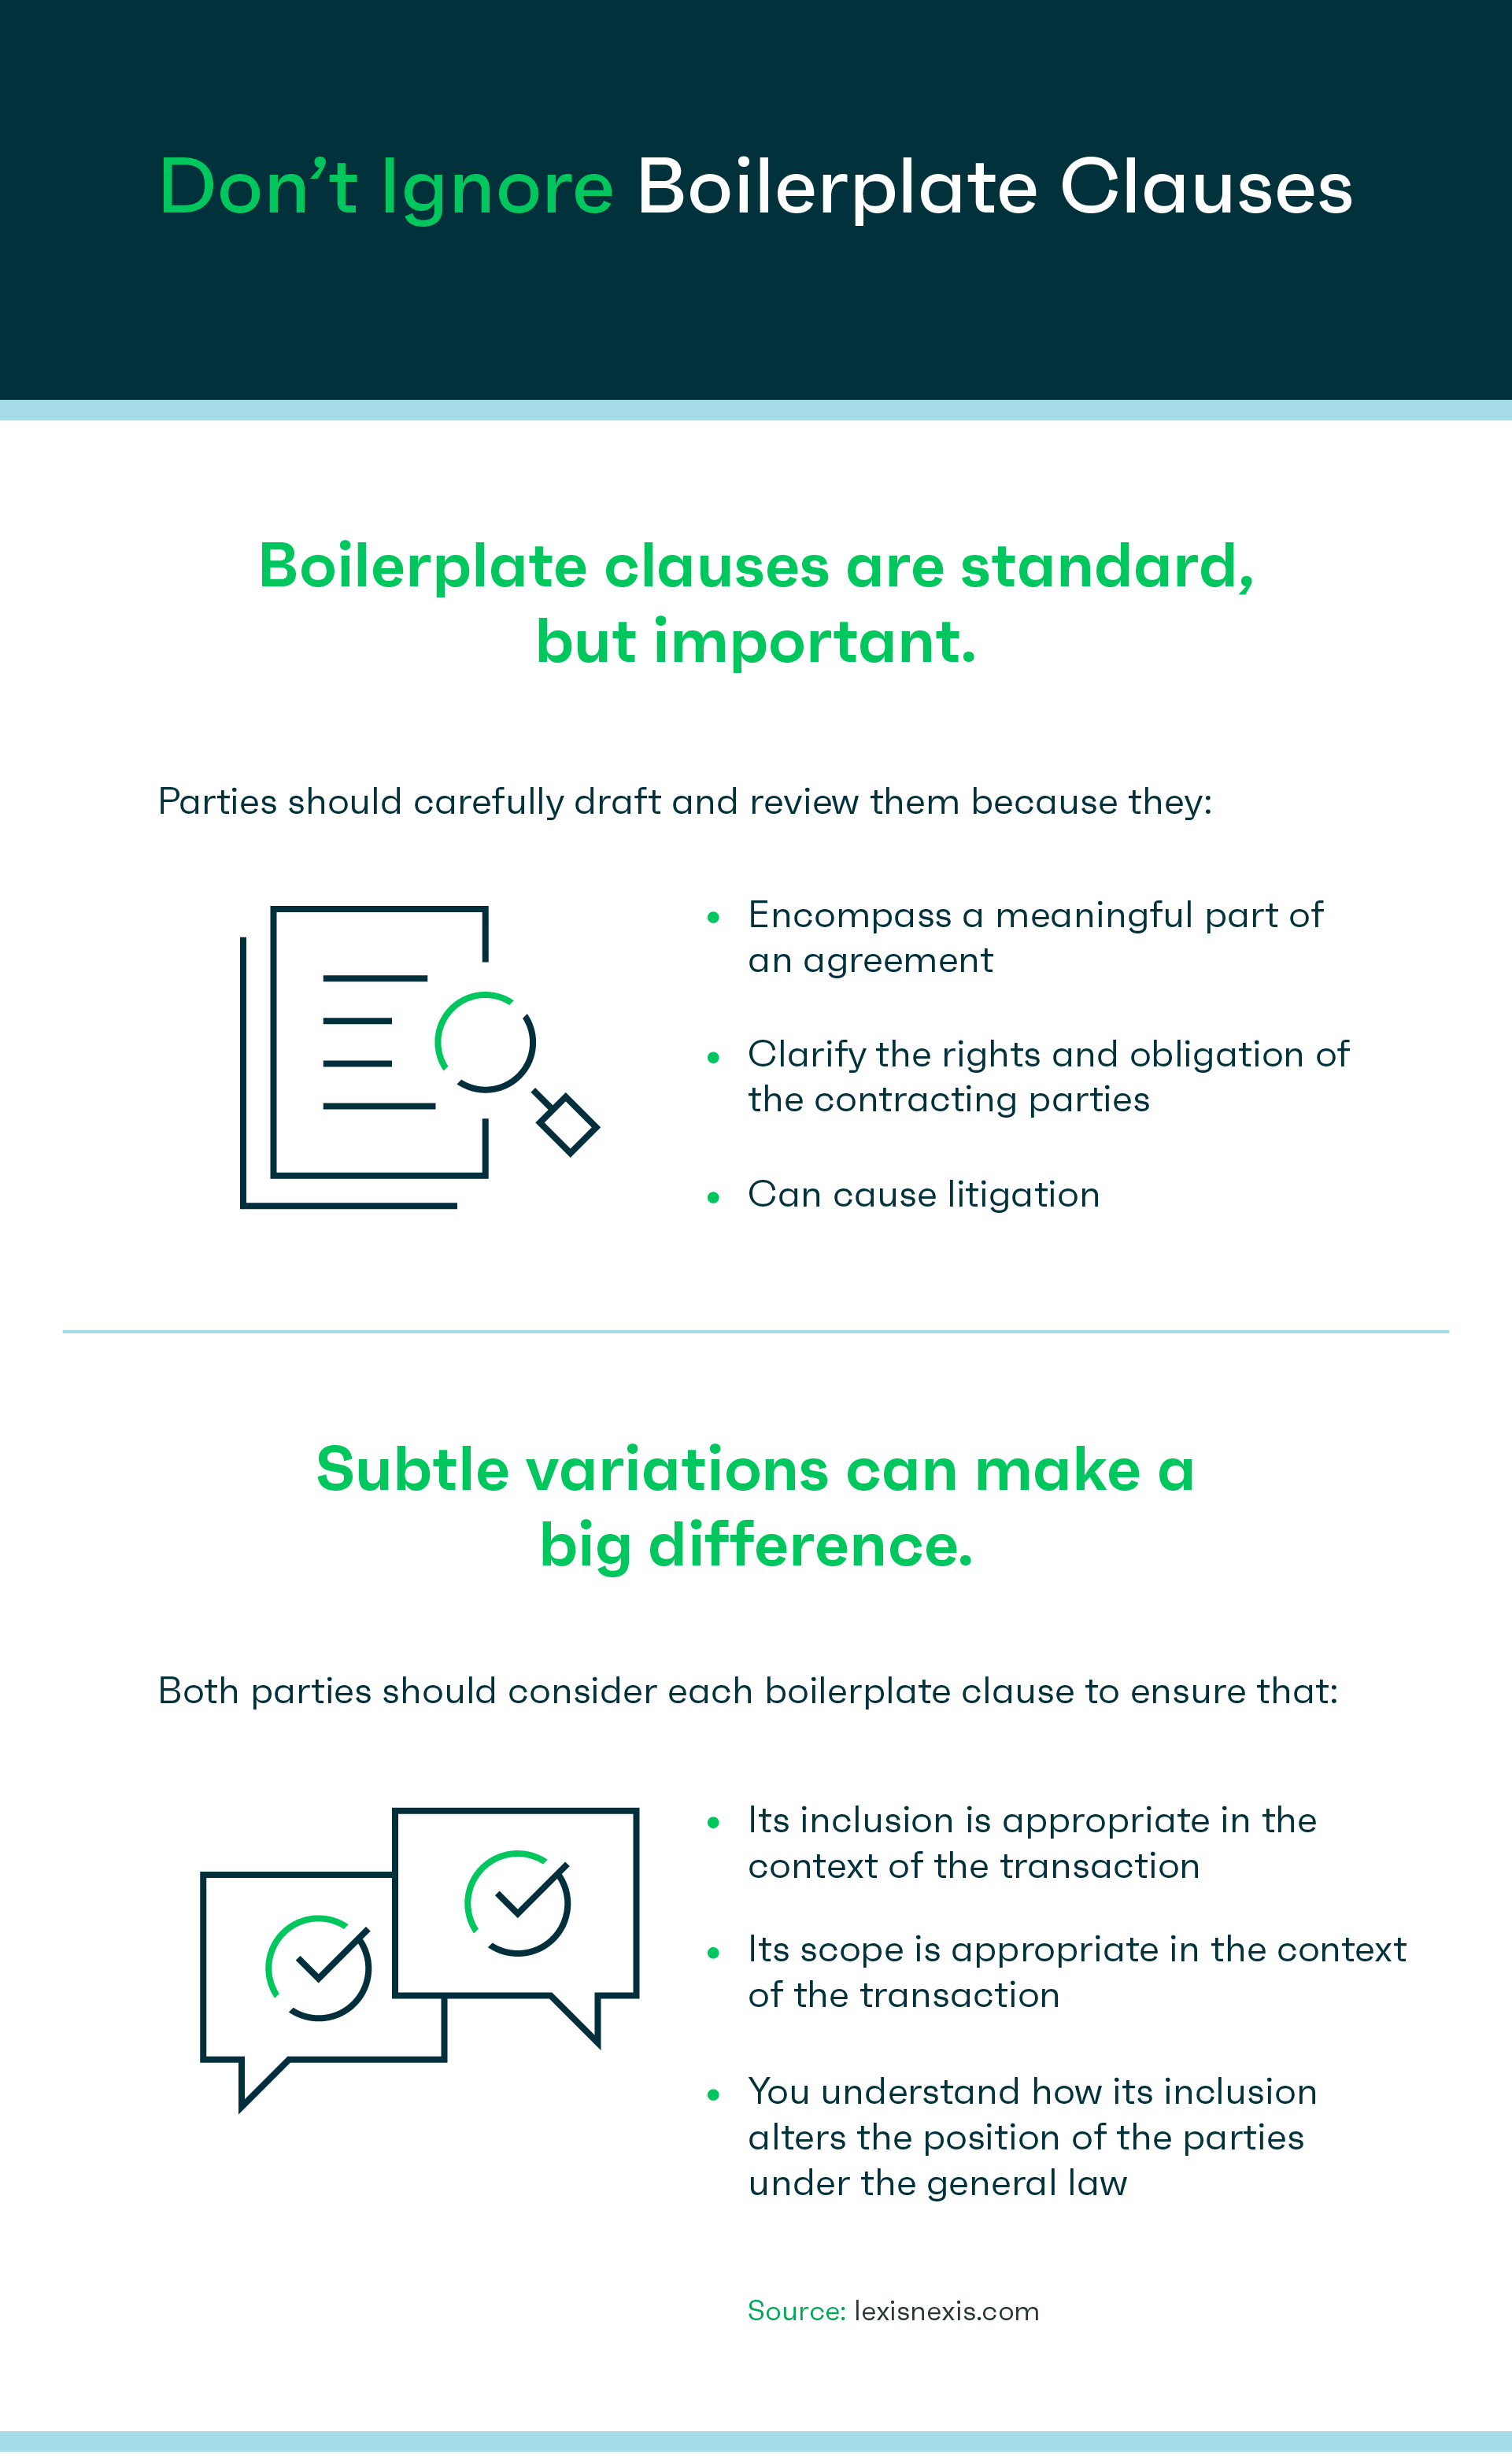 Don&rsquo;t ignore boilerplate clauses - infographic